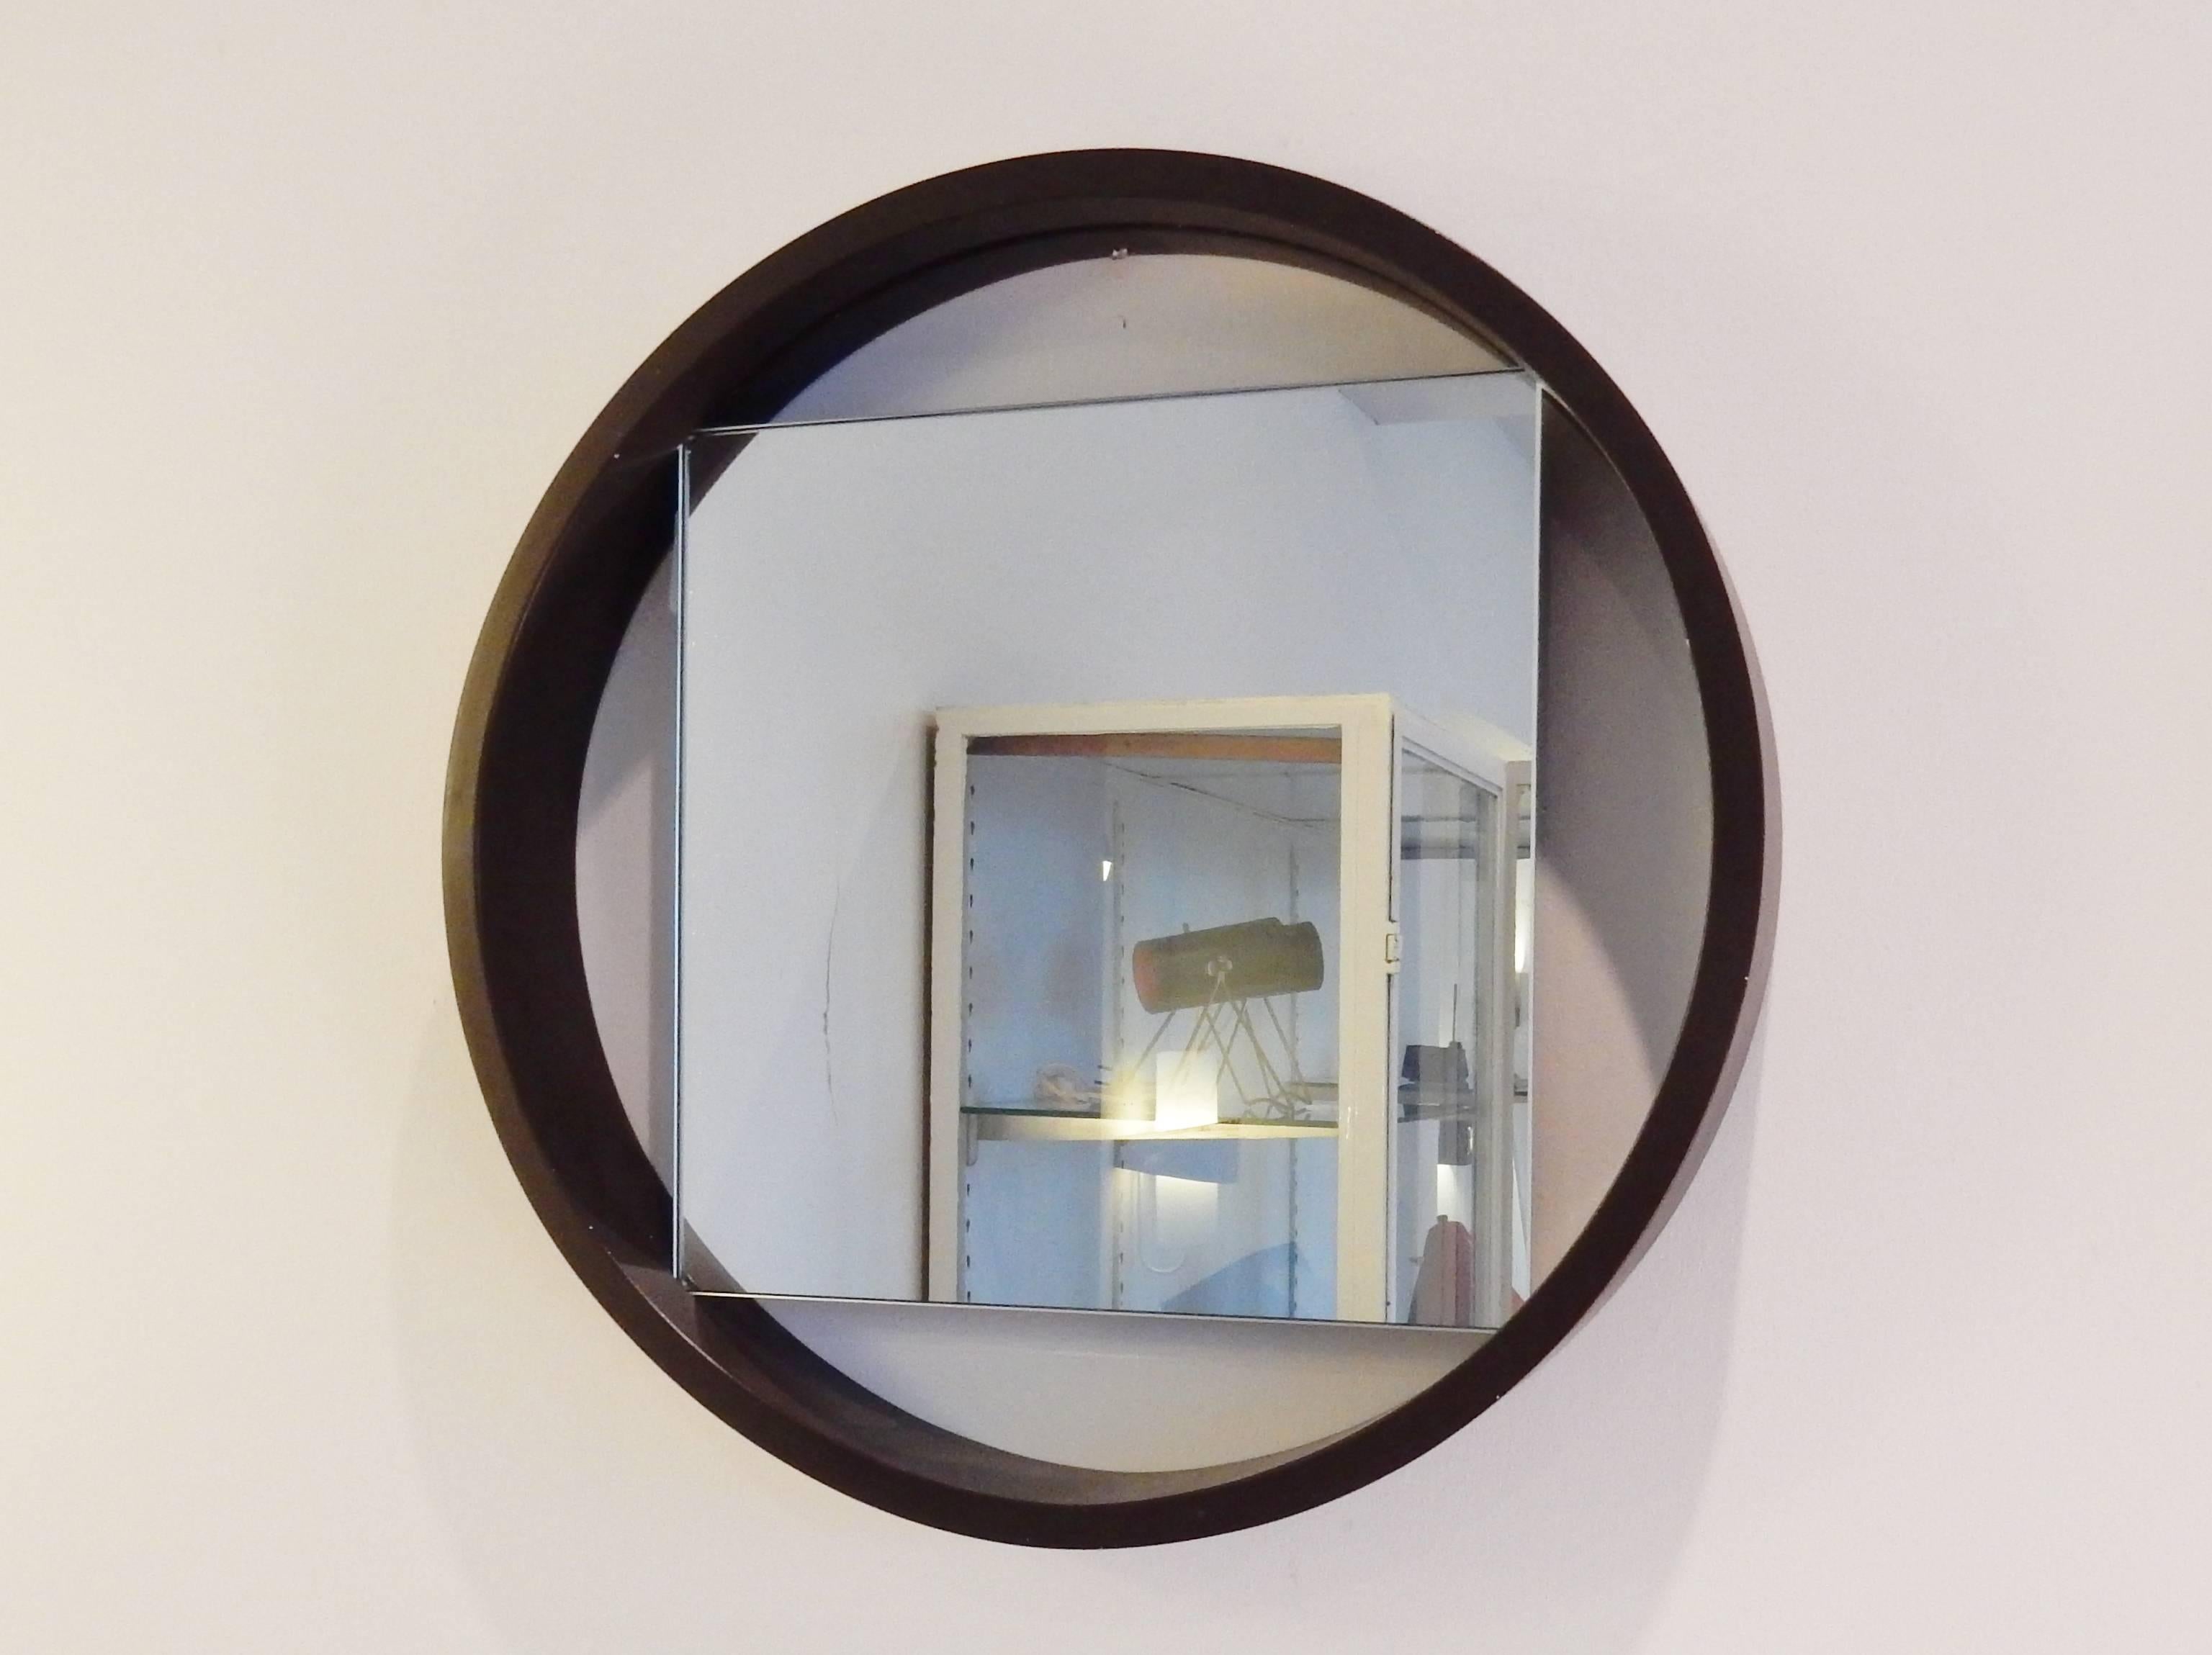 Mirror of true Dutch design. Simple and very exciting. The contrast and playfulness of the round frame and the square mirror make this an icon of Dutch design. This design is from 1956 and was in production by 't Spectrum from 1964 to 1971.